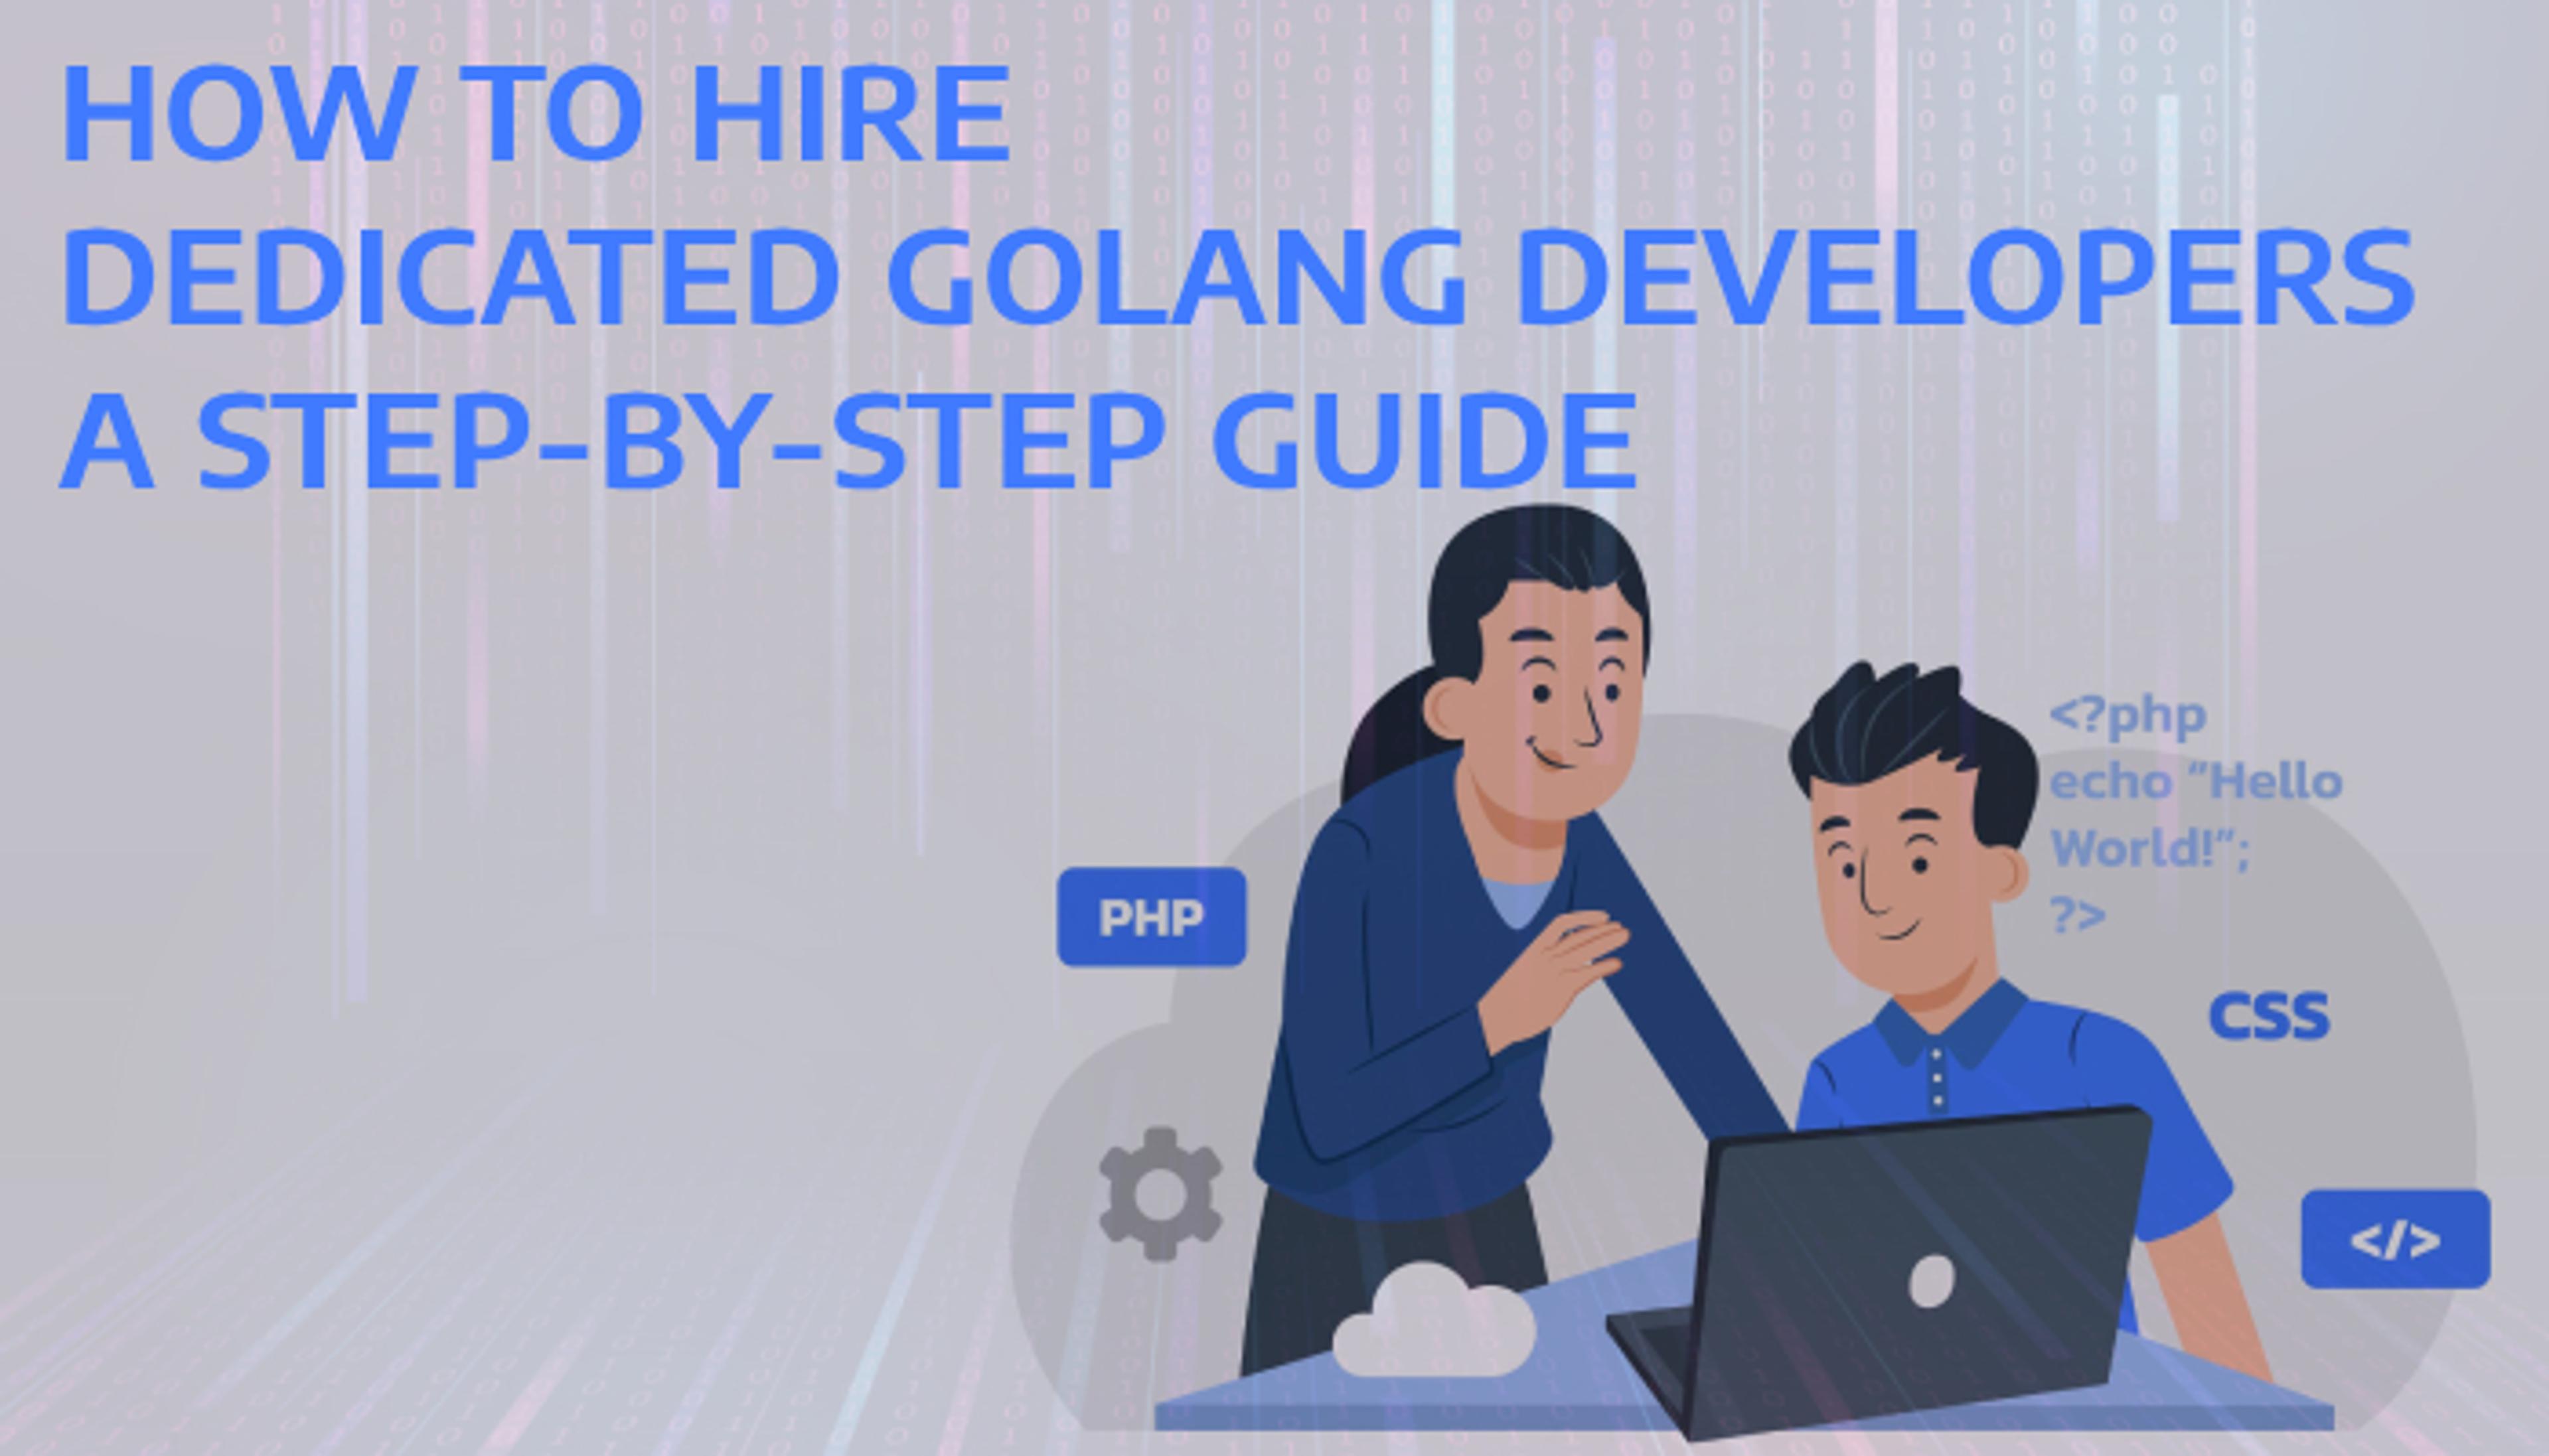 How To Hire Dedicated Golang Developers